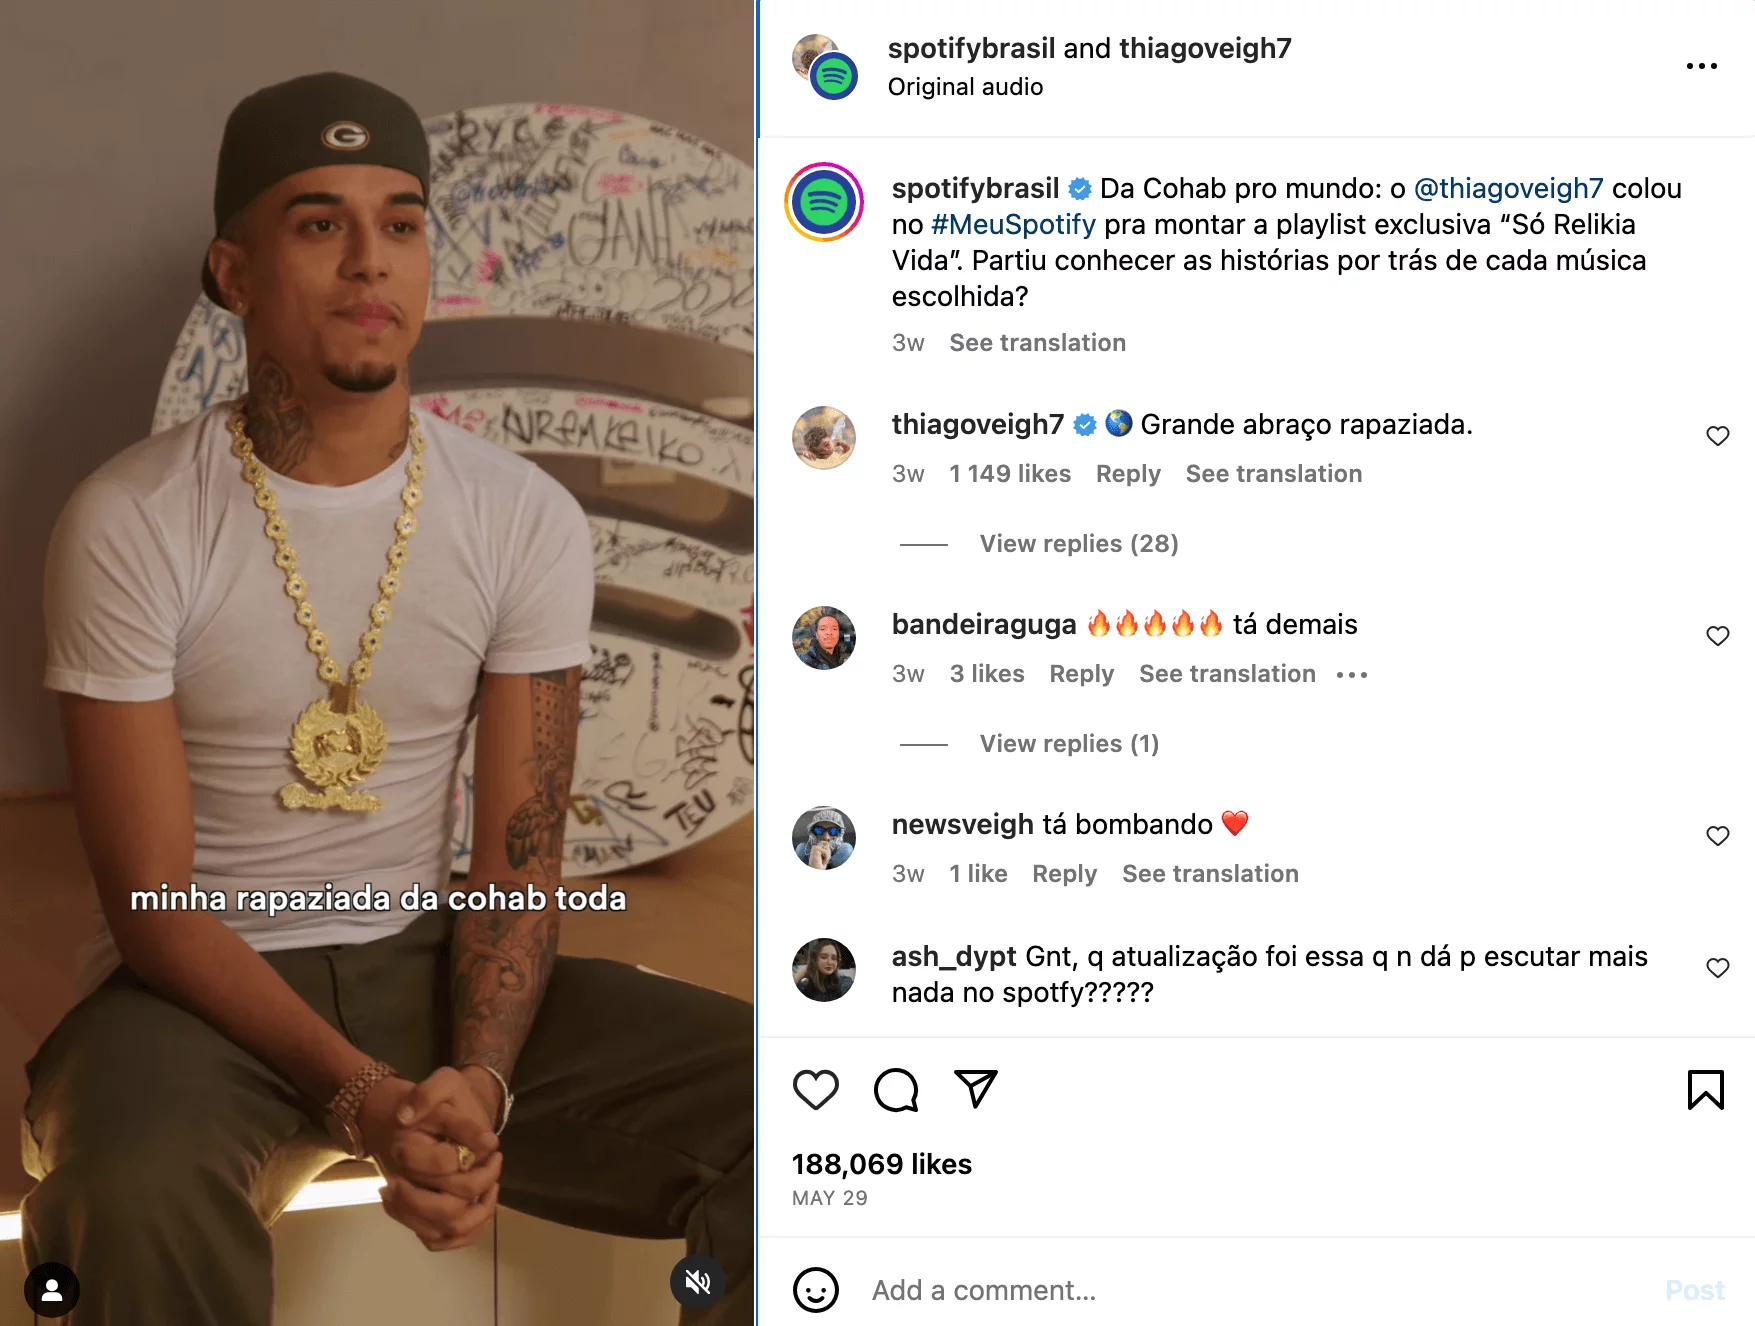 Instagram post showing a the photo of thiagoveigh7 with a message in Brasilian, marked as a collaboration between him and spotifybrasil